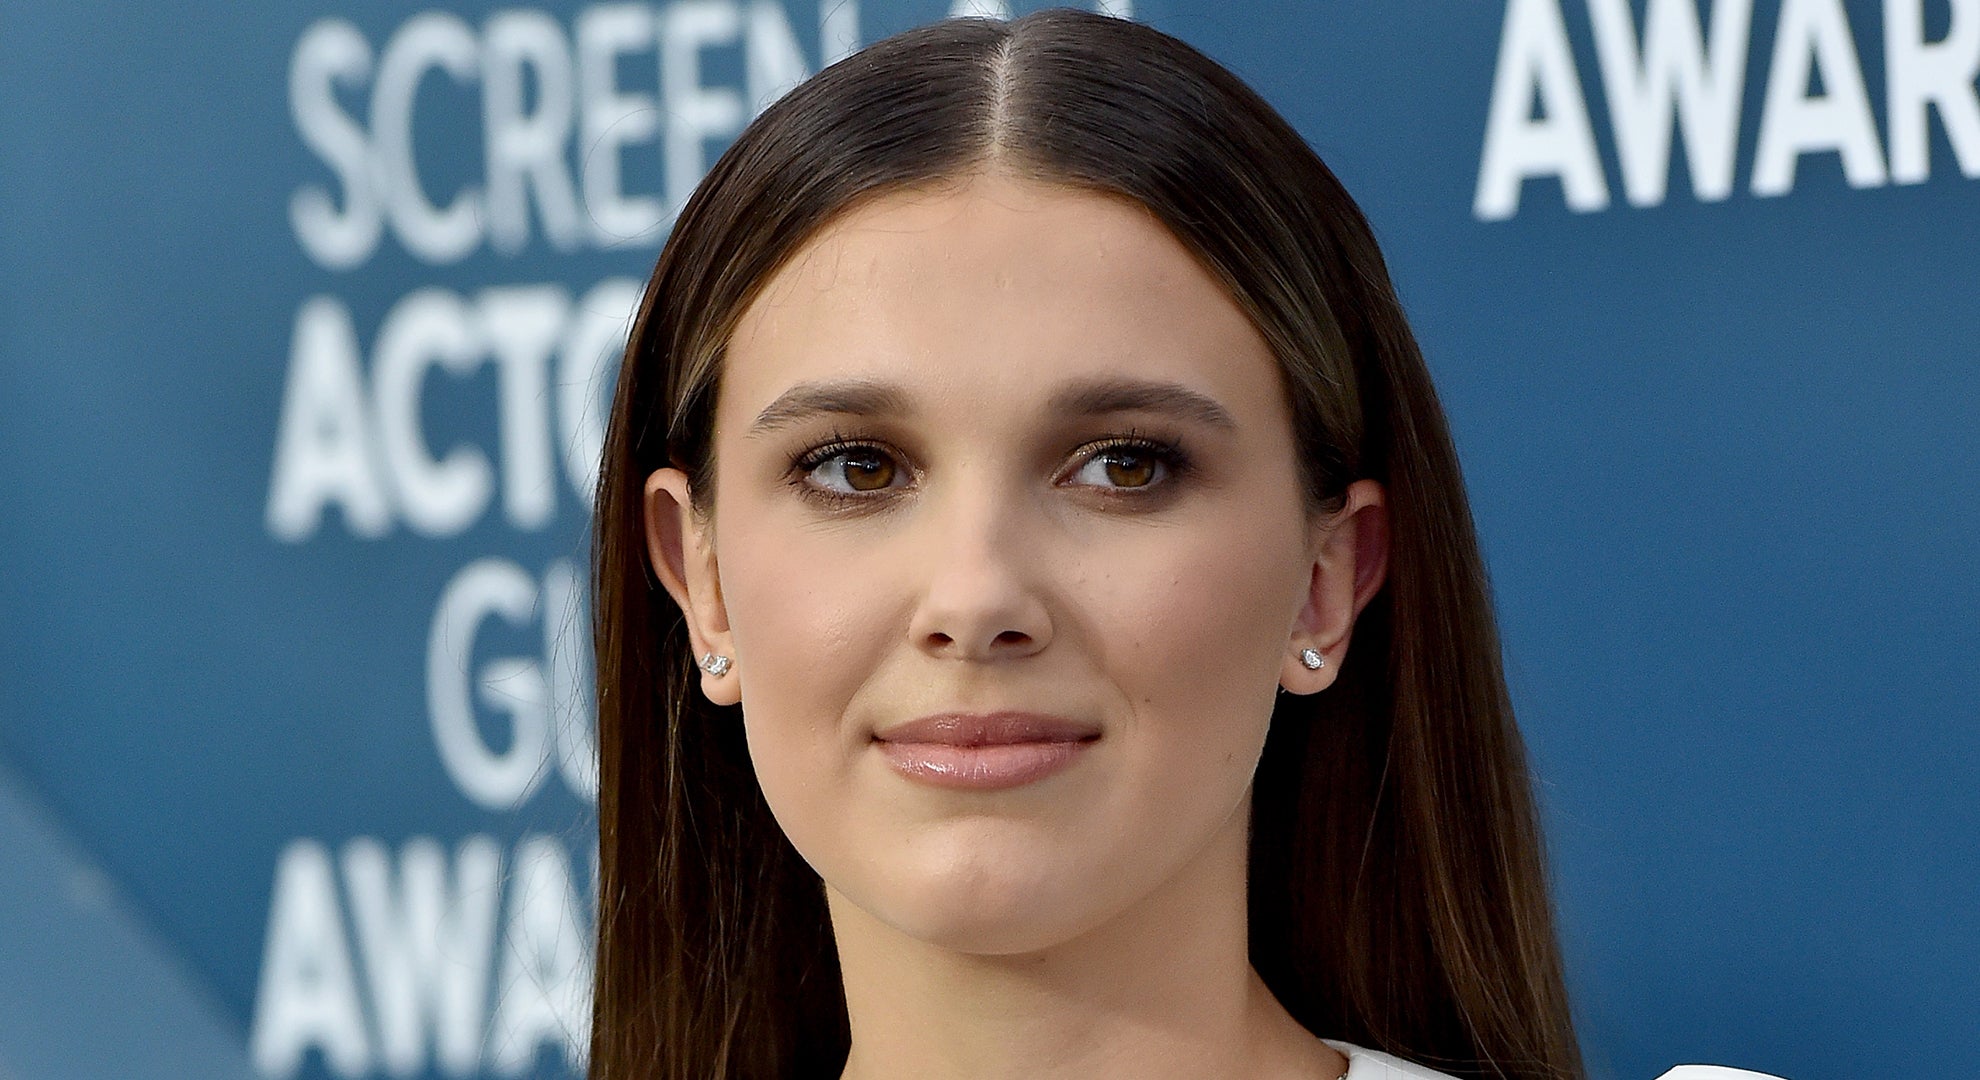 Millie Bobby Brown reveals the 'gross' change she's seen since turning 18